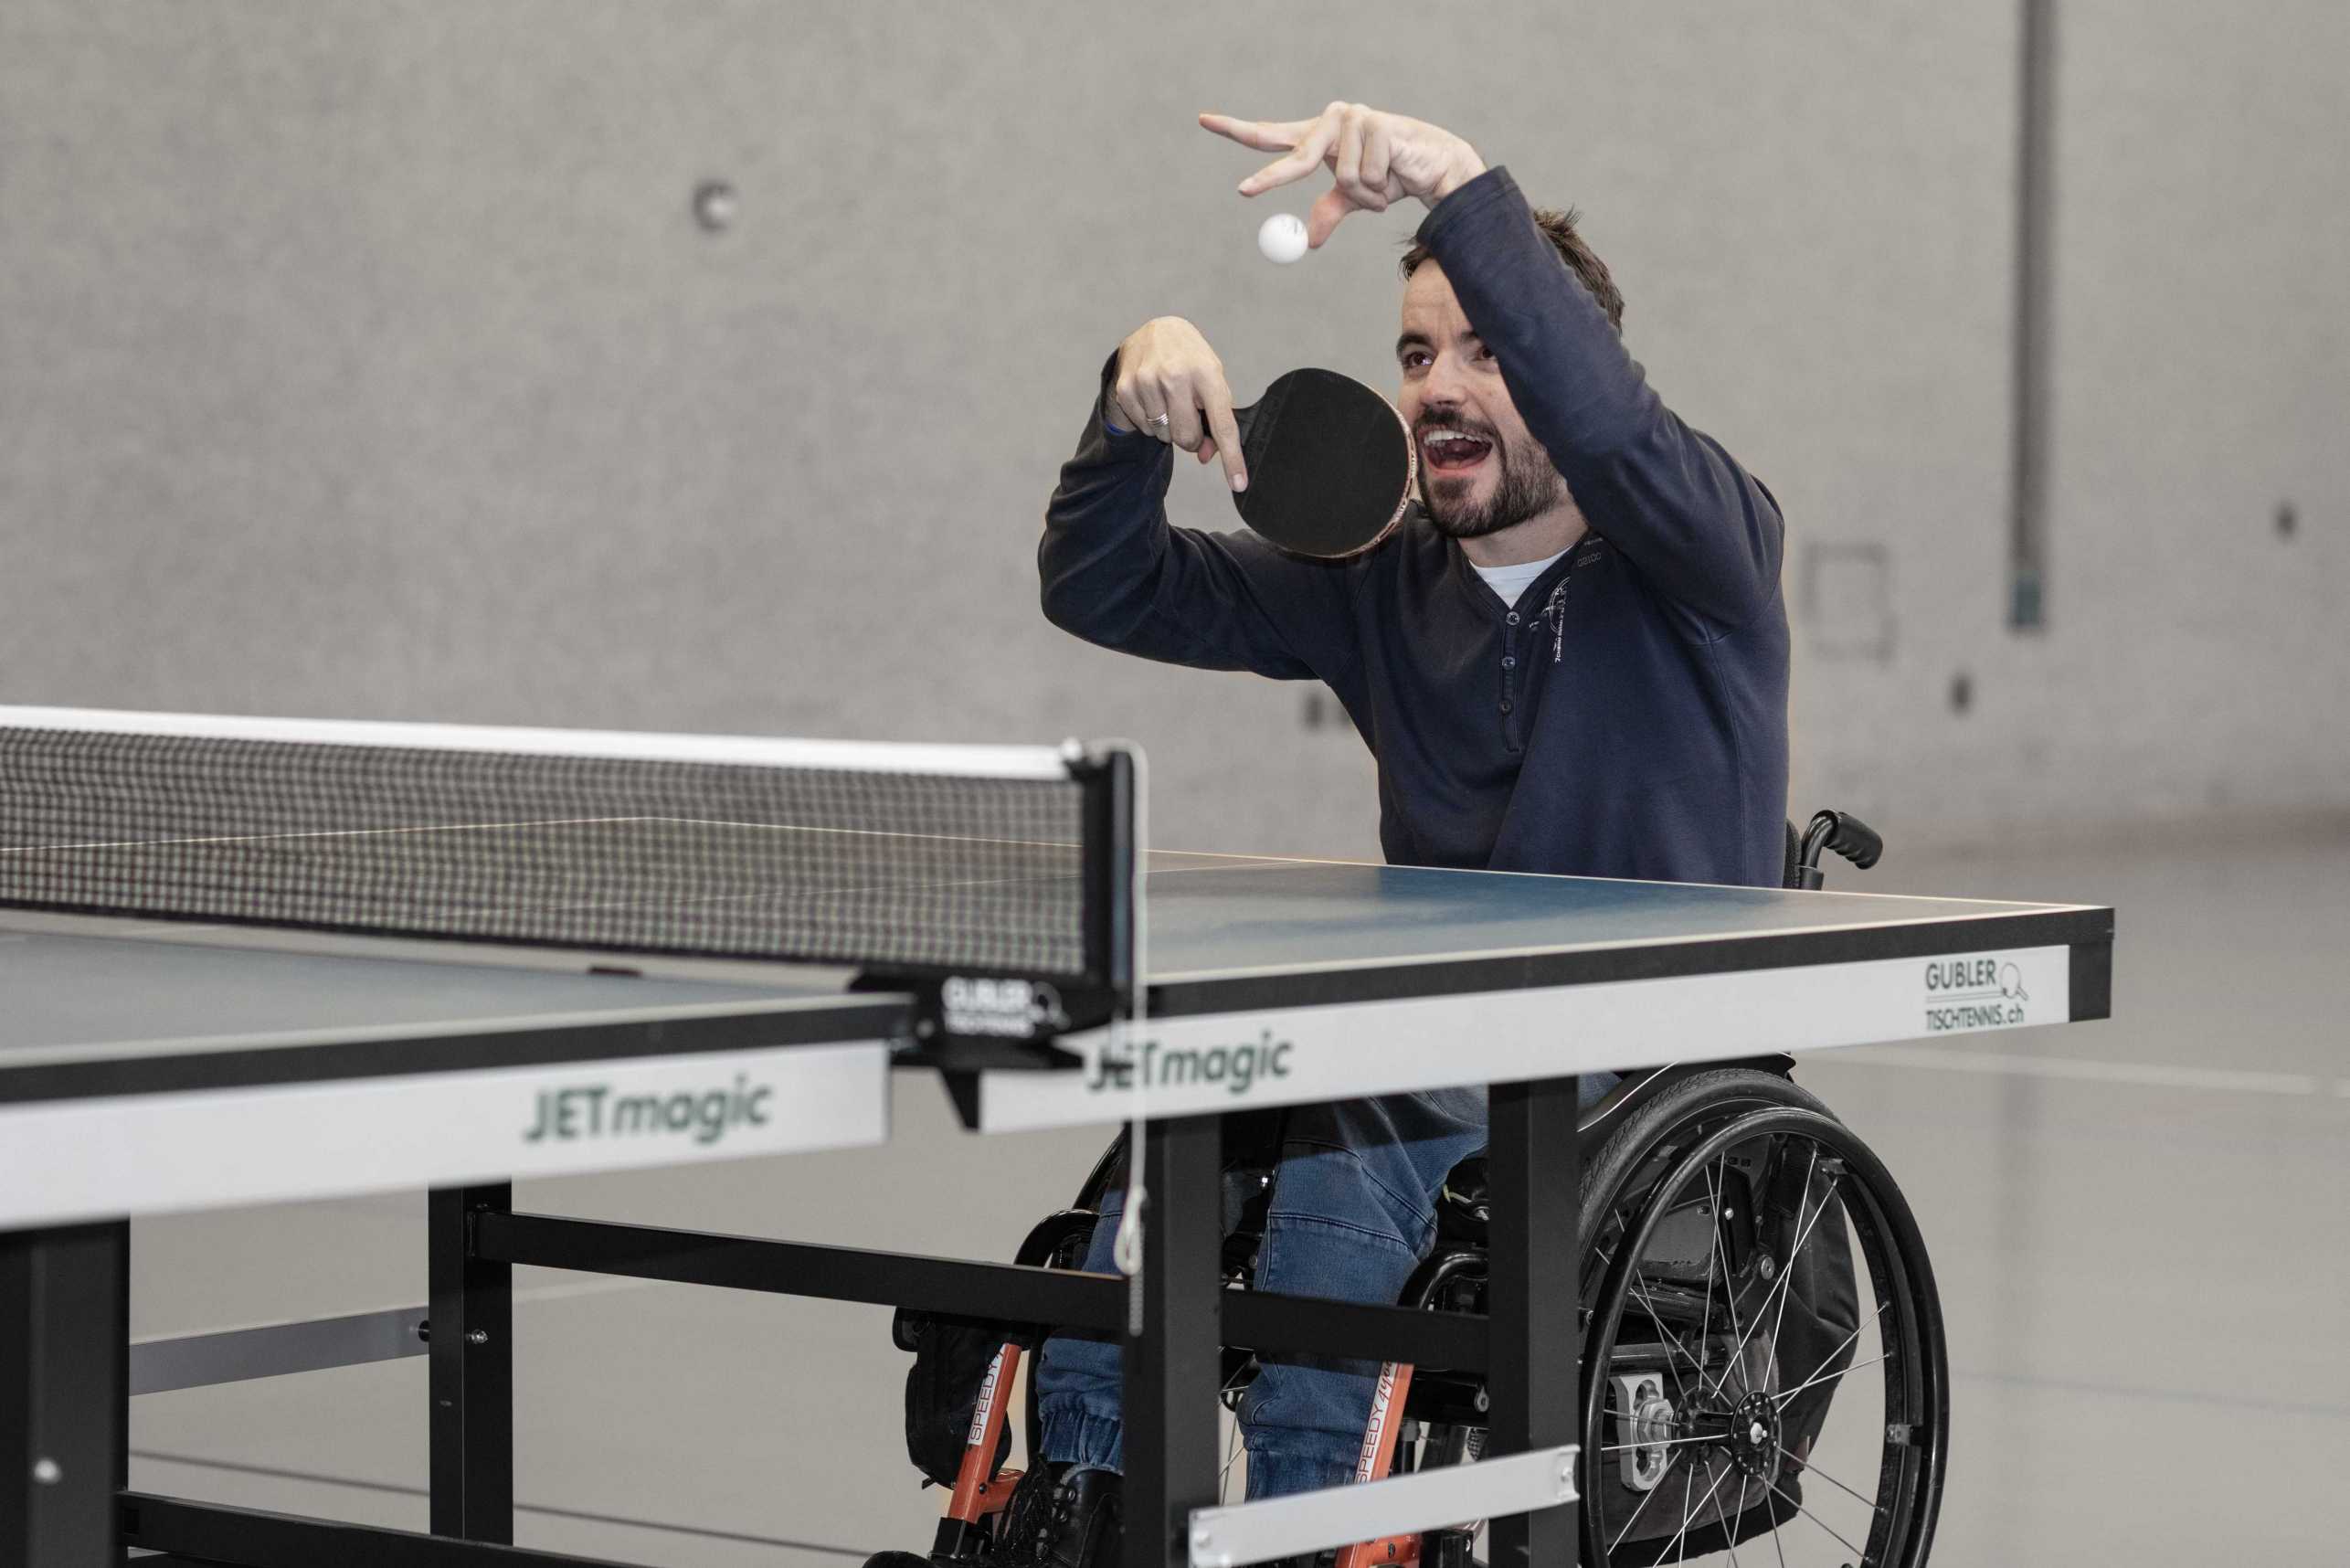 Enlarged view: Philippe Amann plays table tennis sitting in a wheelchair